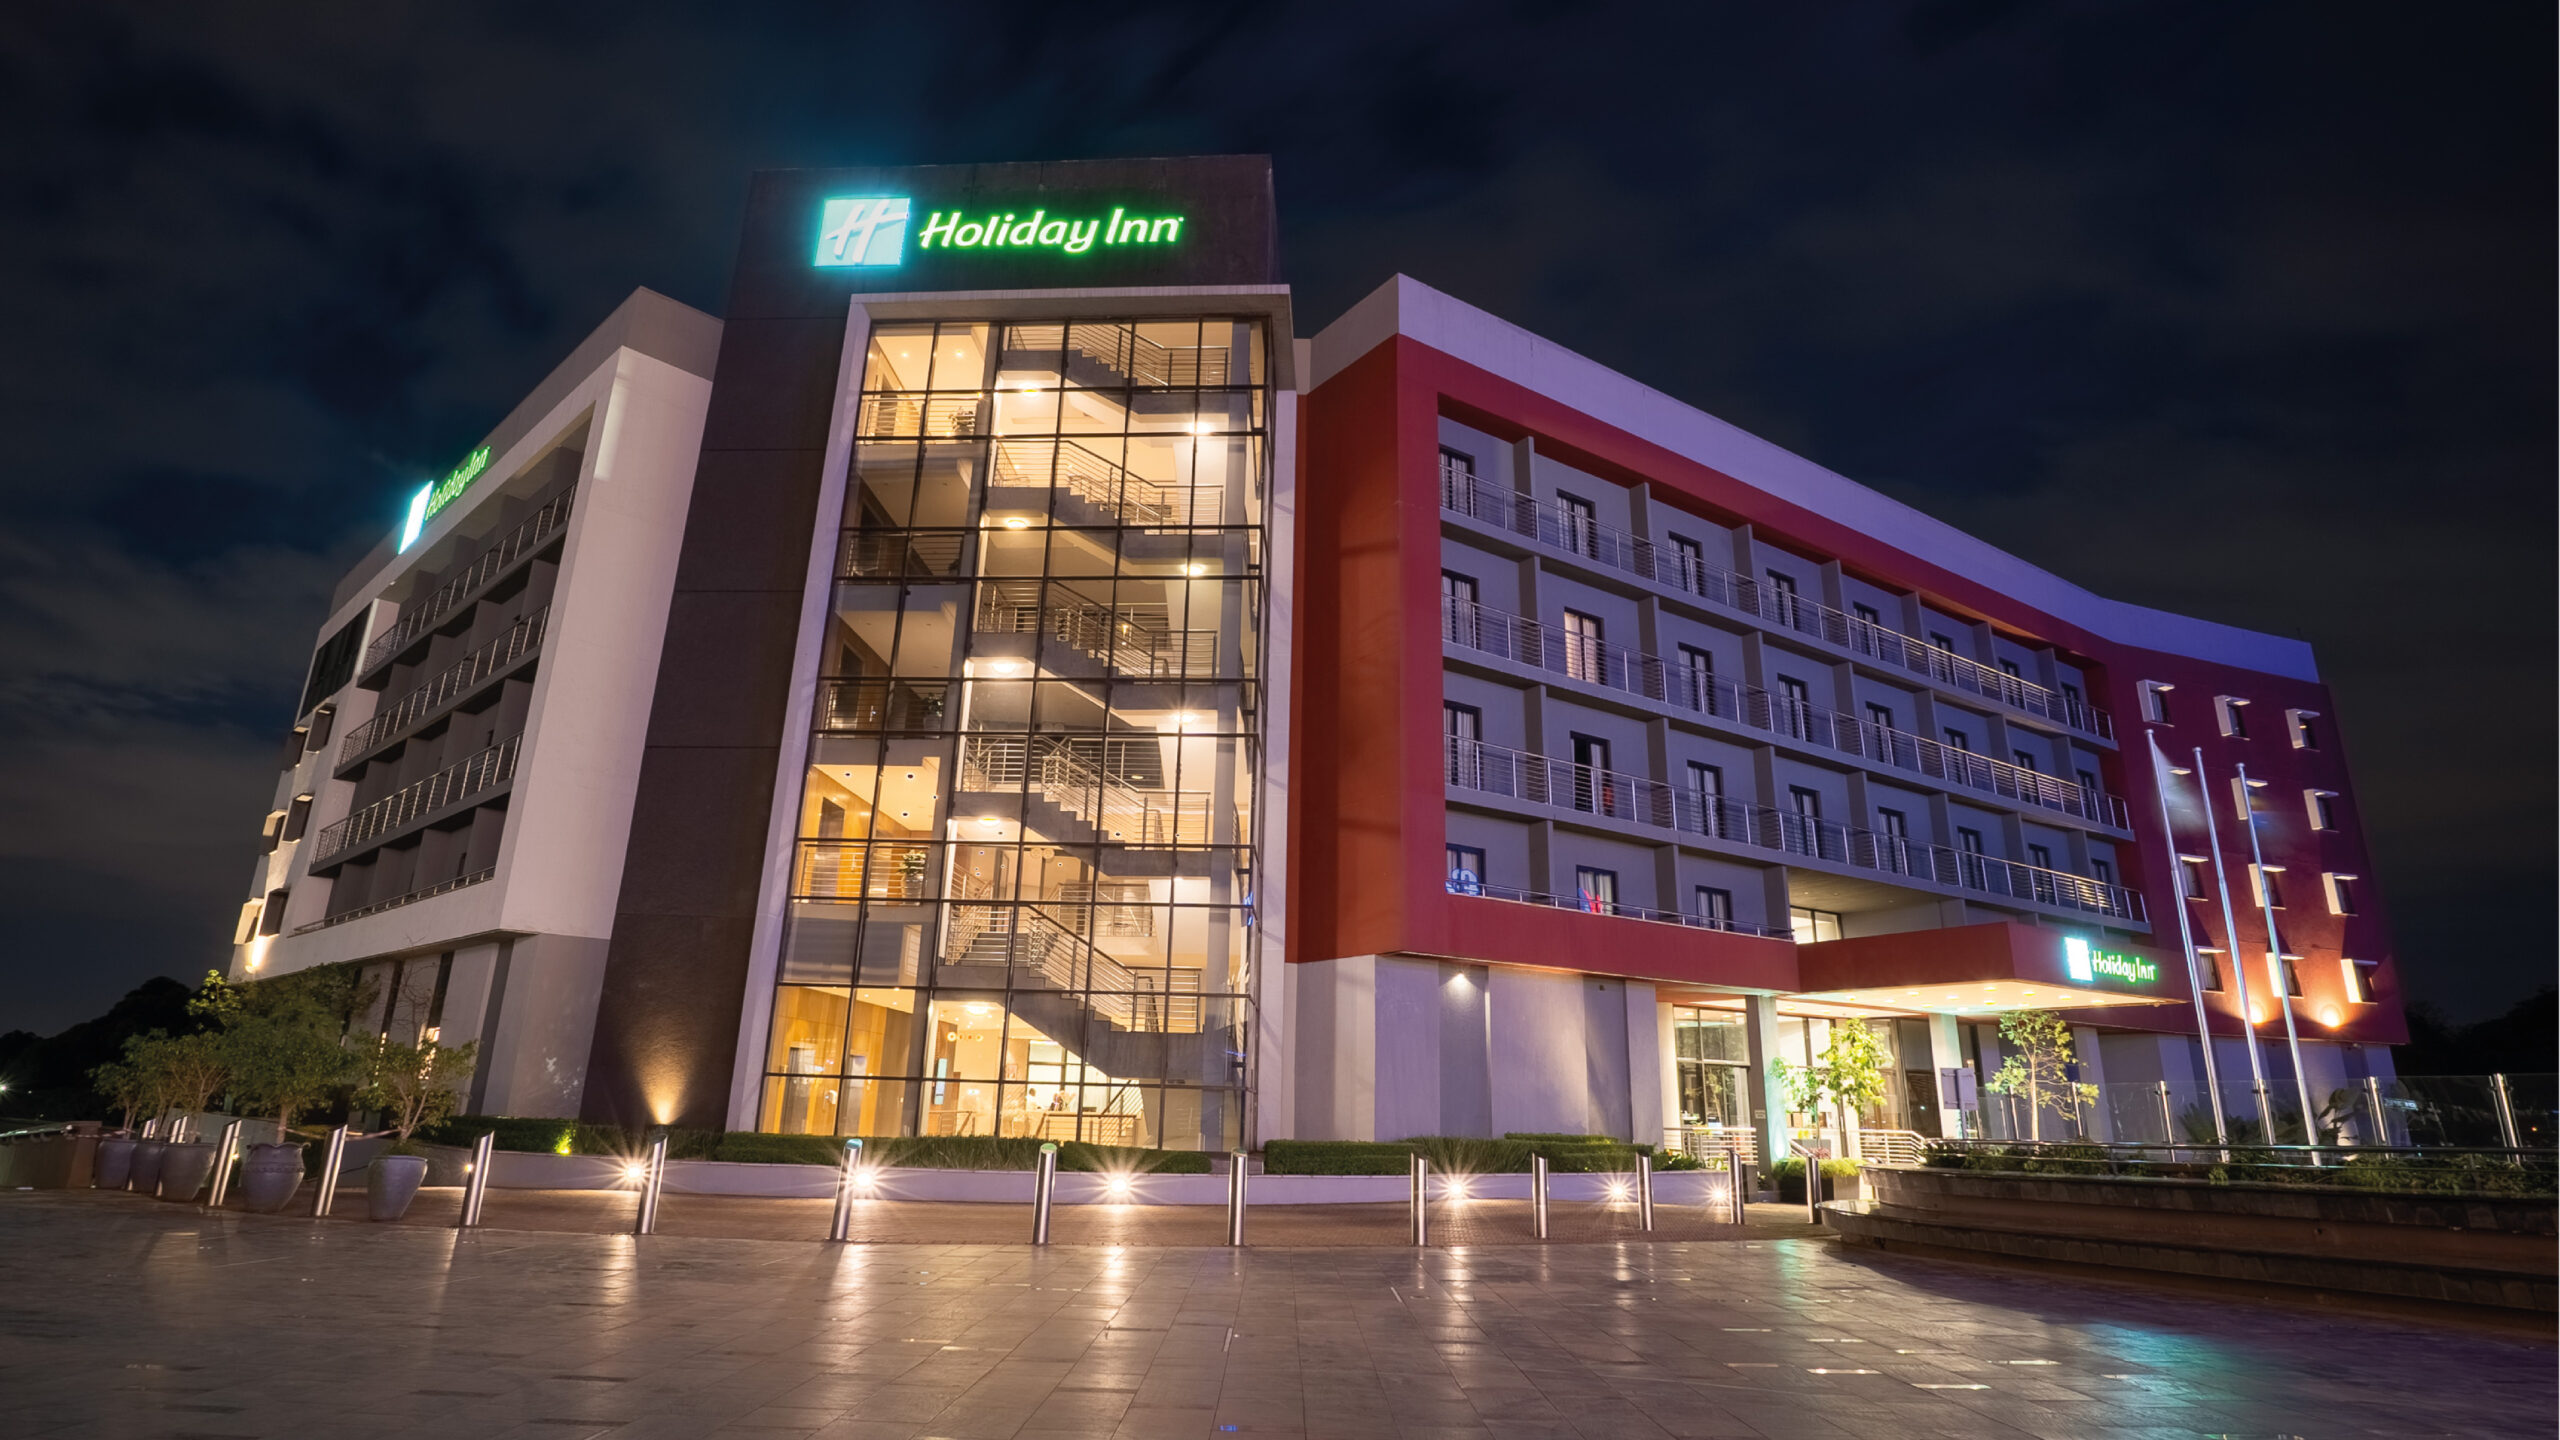 Read more about the article InterContinental Hotels Group (IHG) partners with Msafiri Limited to open Holiday Inn and Crowne Plaza hotels across African markets